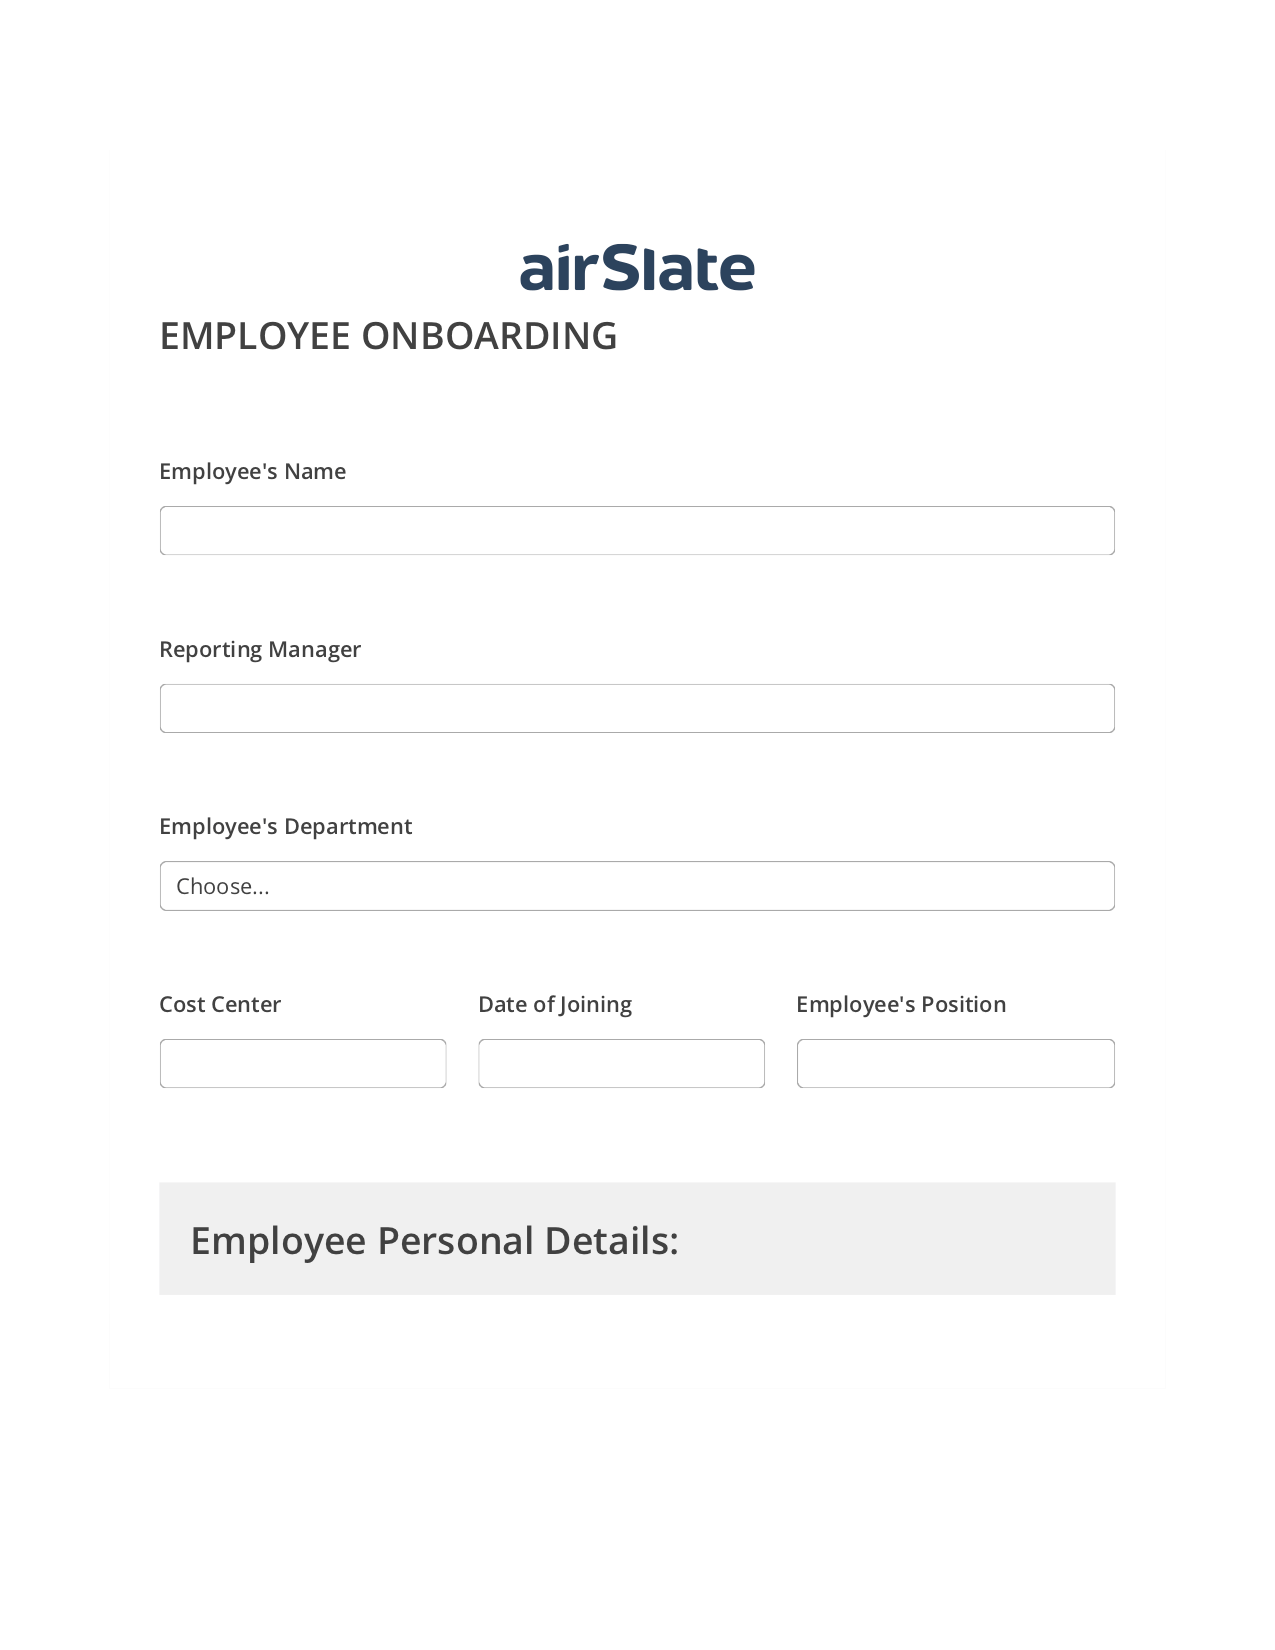 Multirole Employee Onboarding Workflow Pre-fill Slate from MS Dynamics 365 record, Reminder Bot, Export to Smartsheet